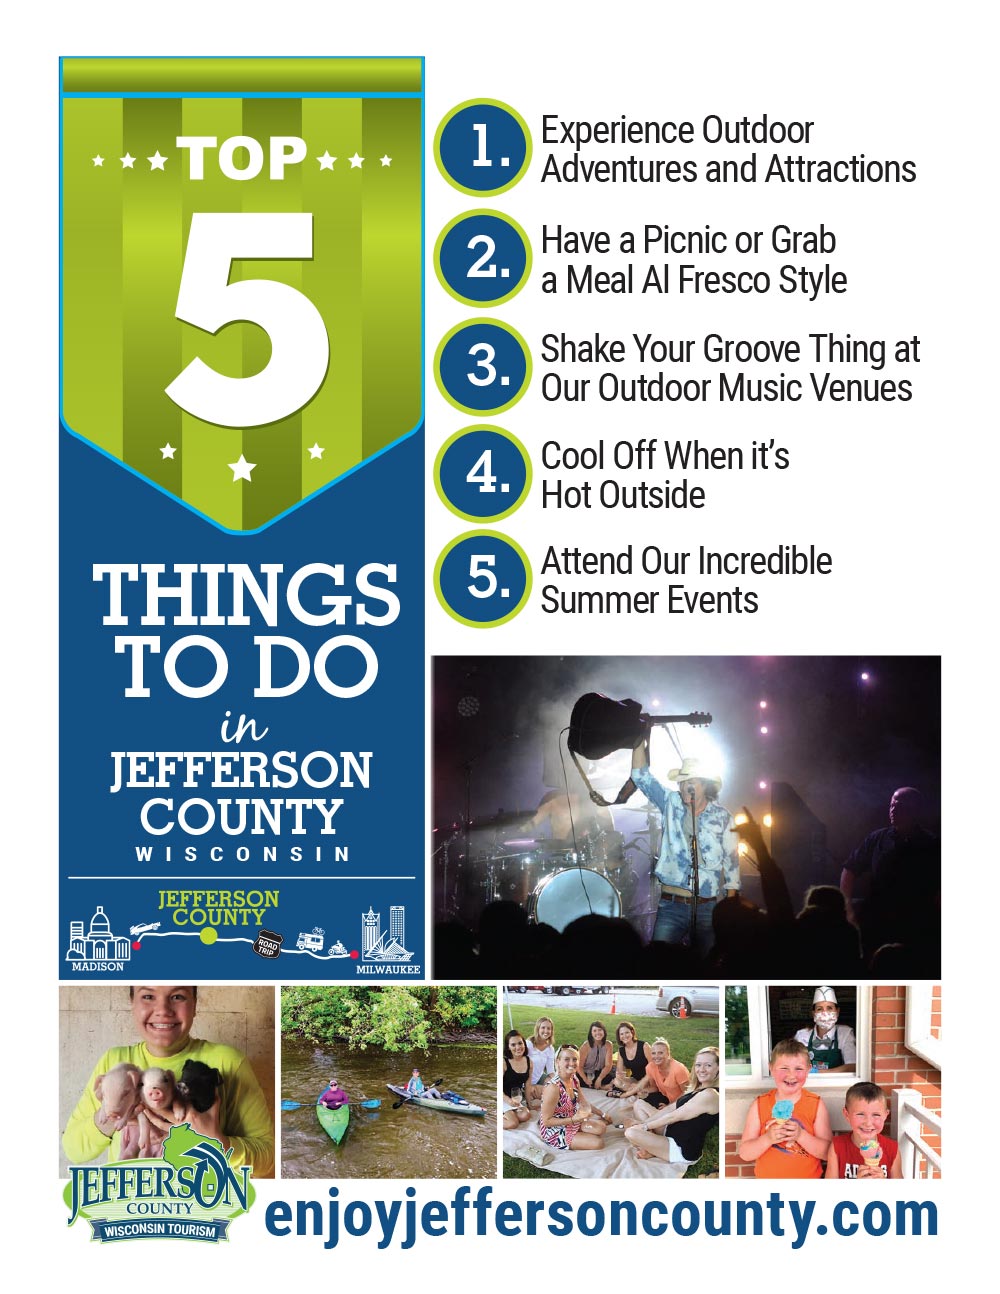 Top 5 Things to Do in Jefferson County